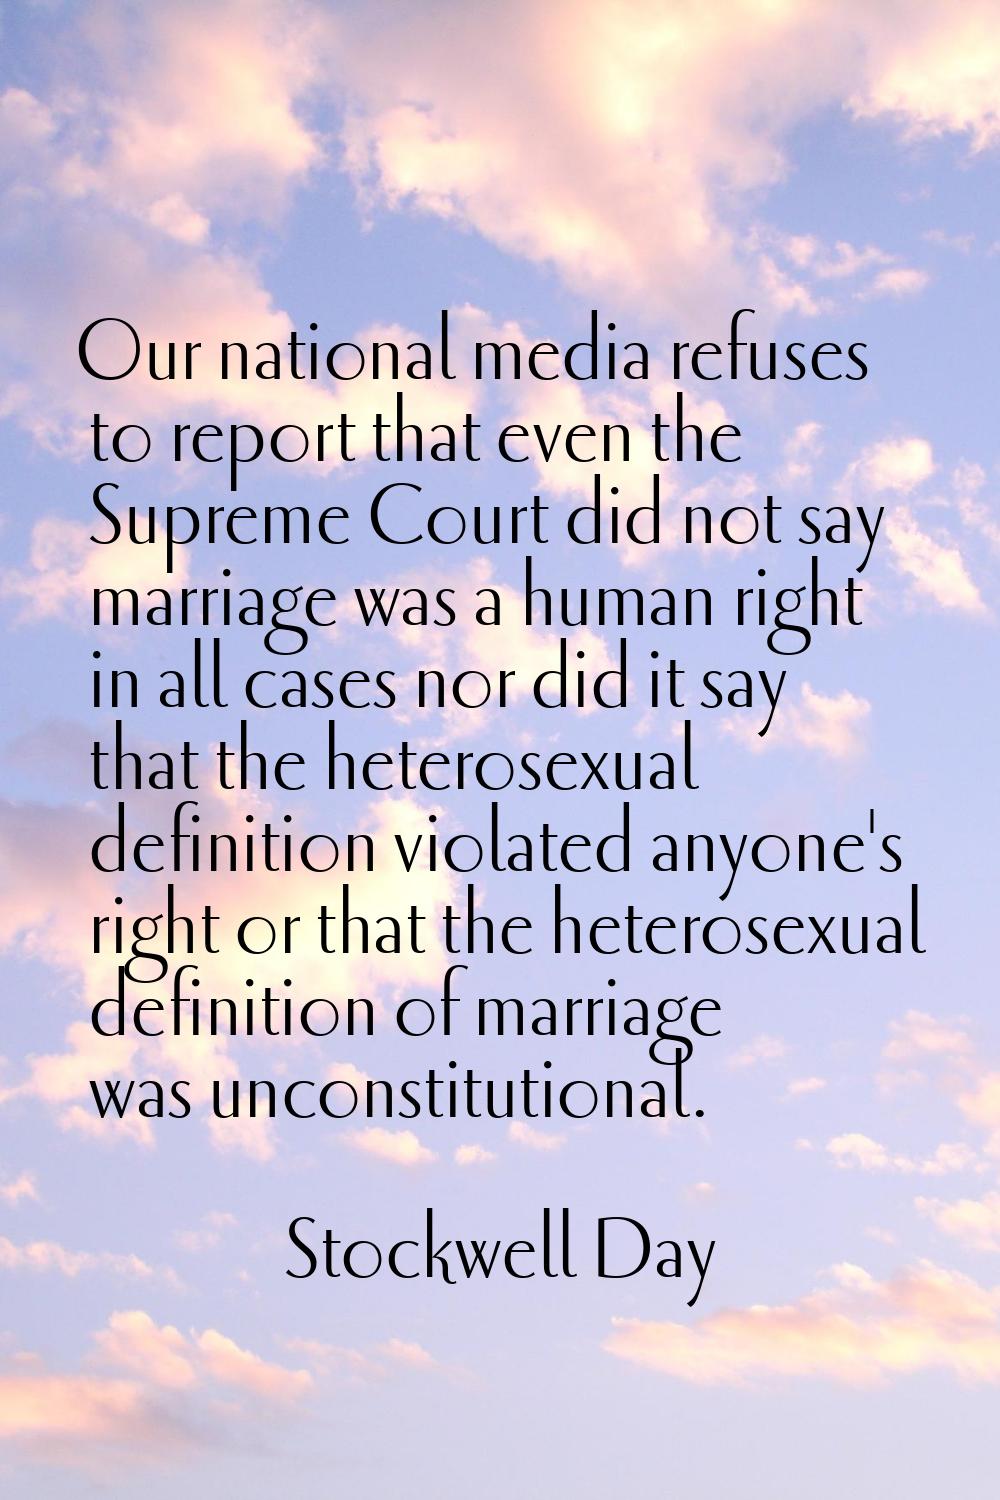 Our national media refuses to report that even the Supreme Court did not say marriage was a human r